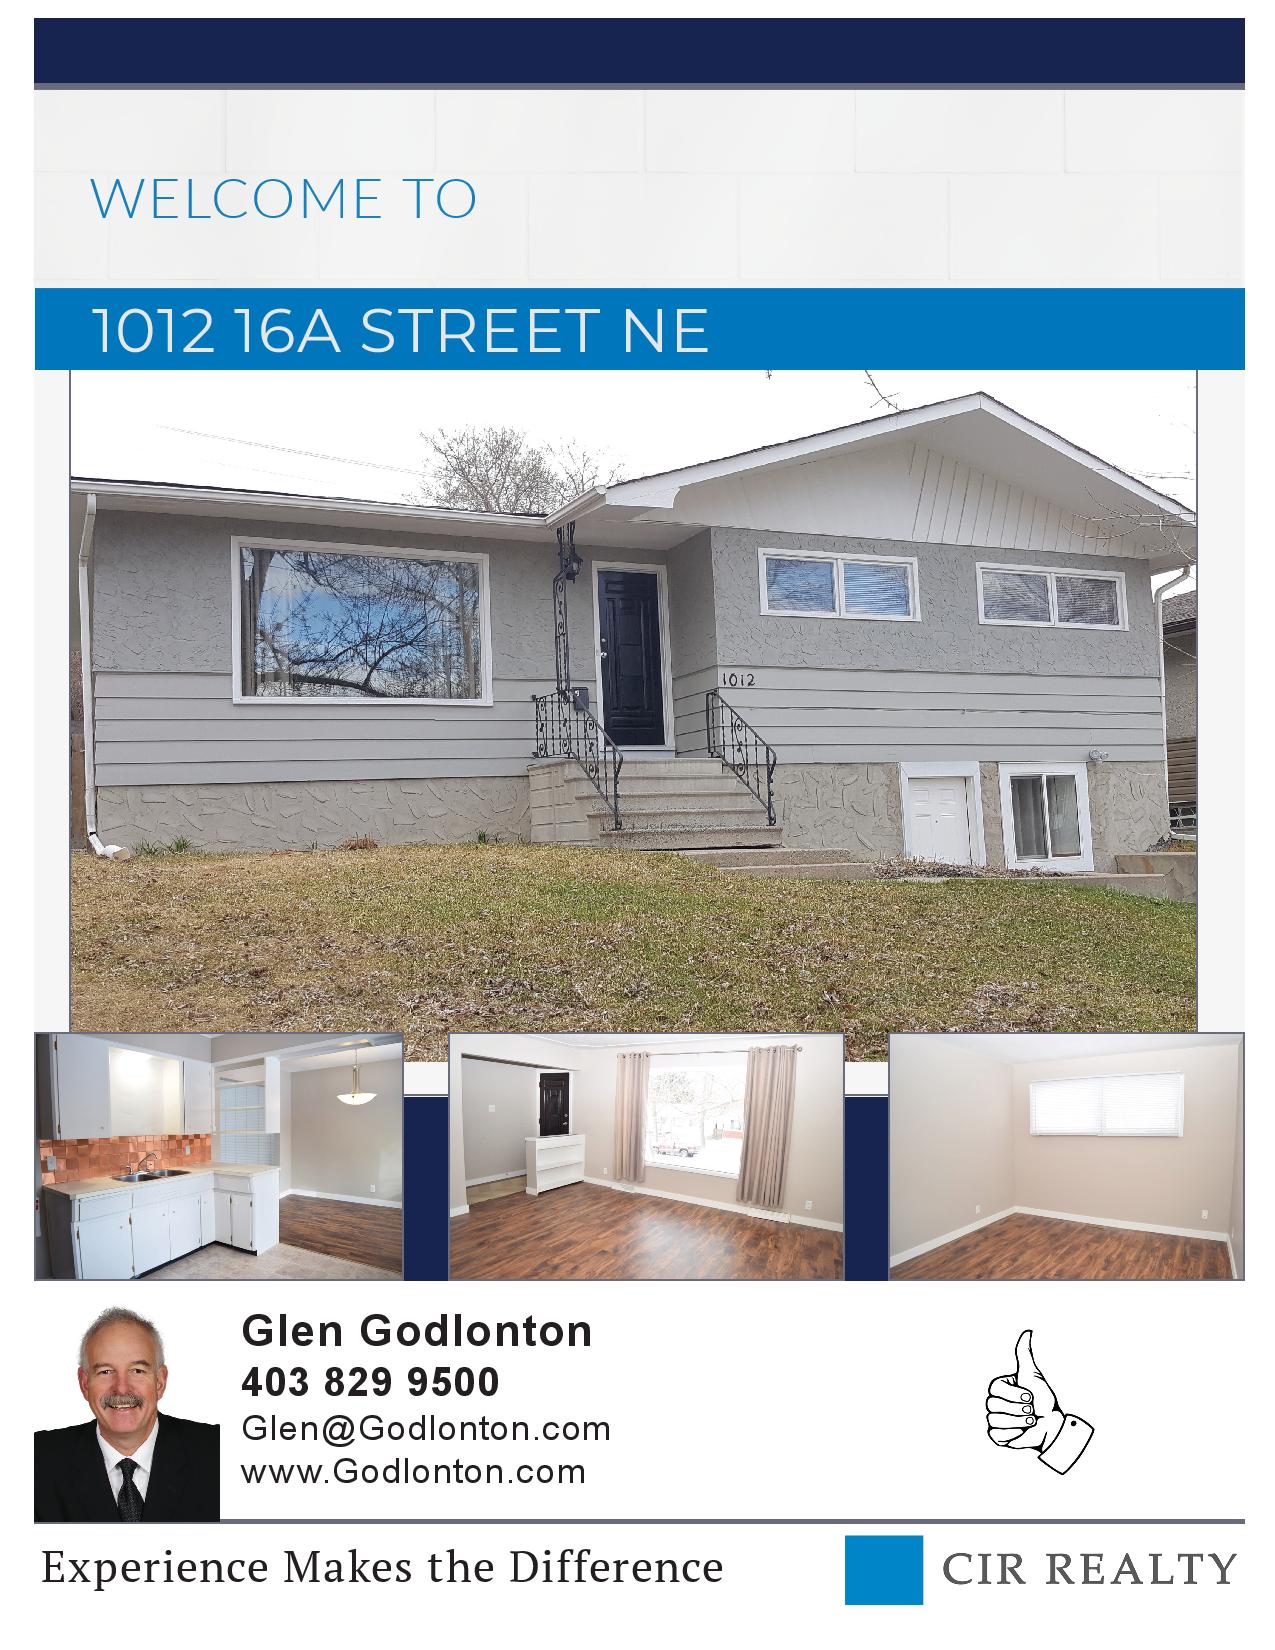 1012 16A STREET NE color CIr Feature Sheet page 1 1 1 | Non-Legal Secondary Suites in Calgary